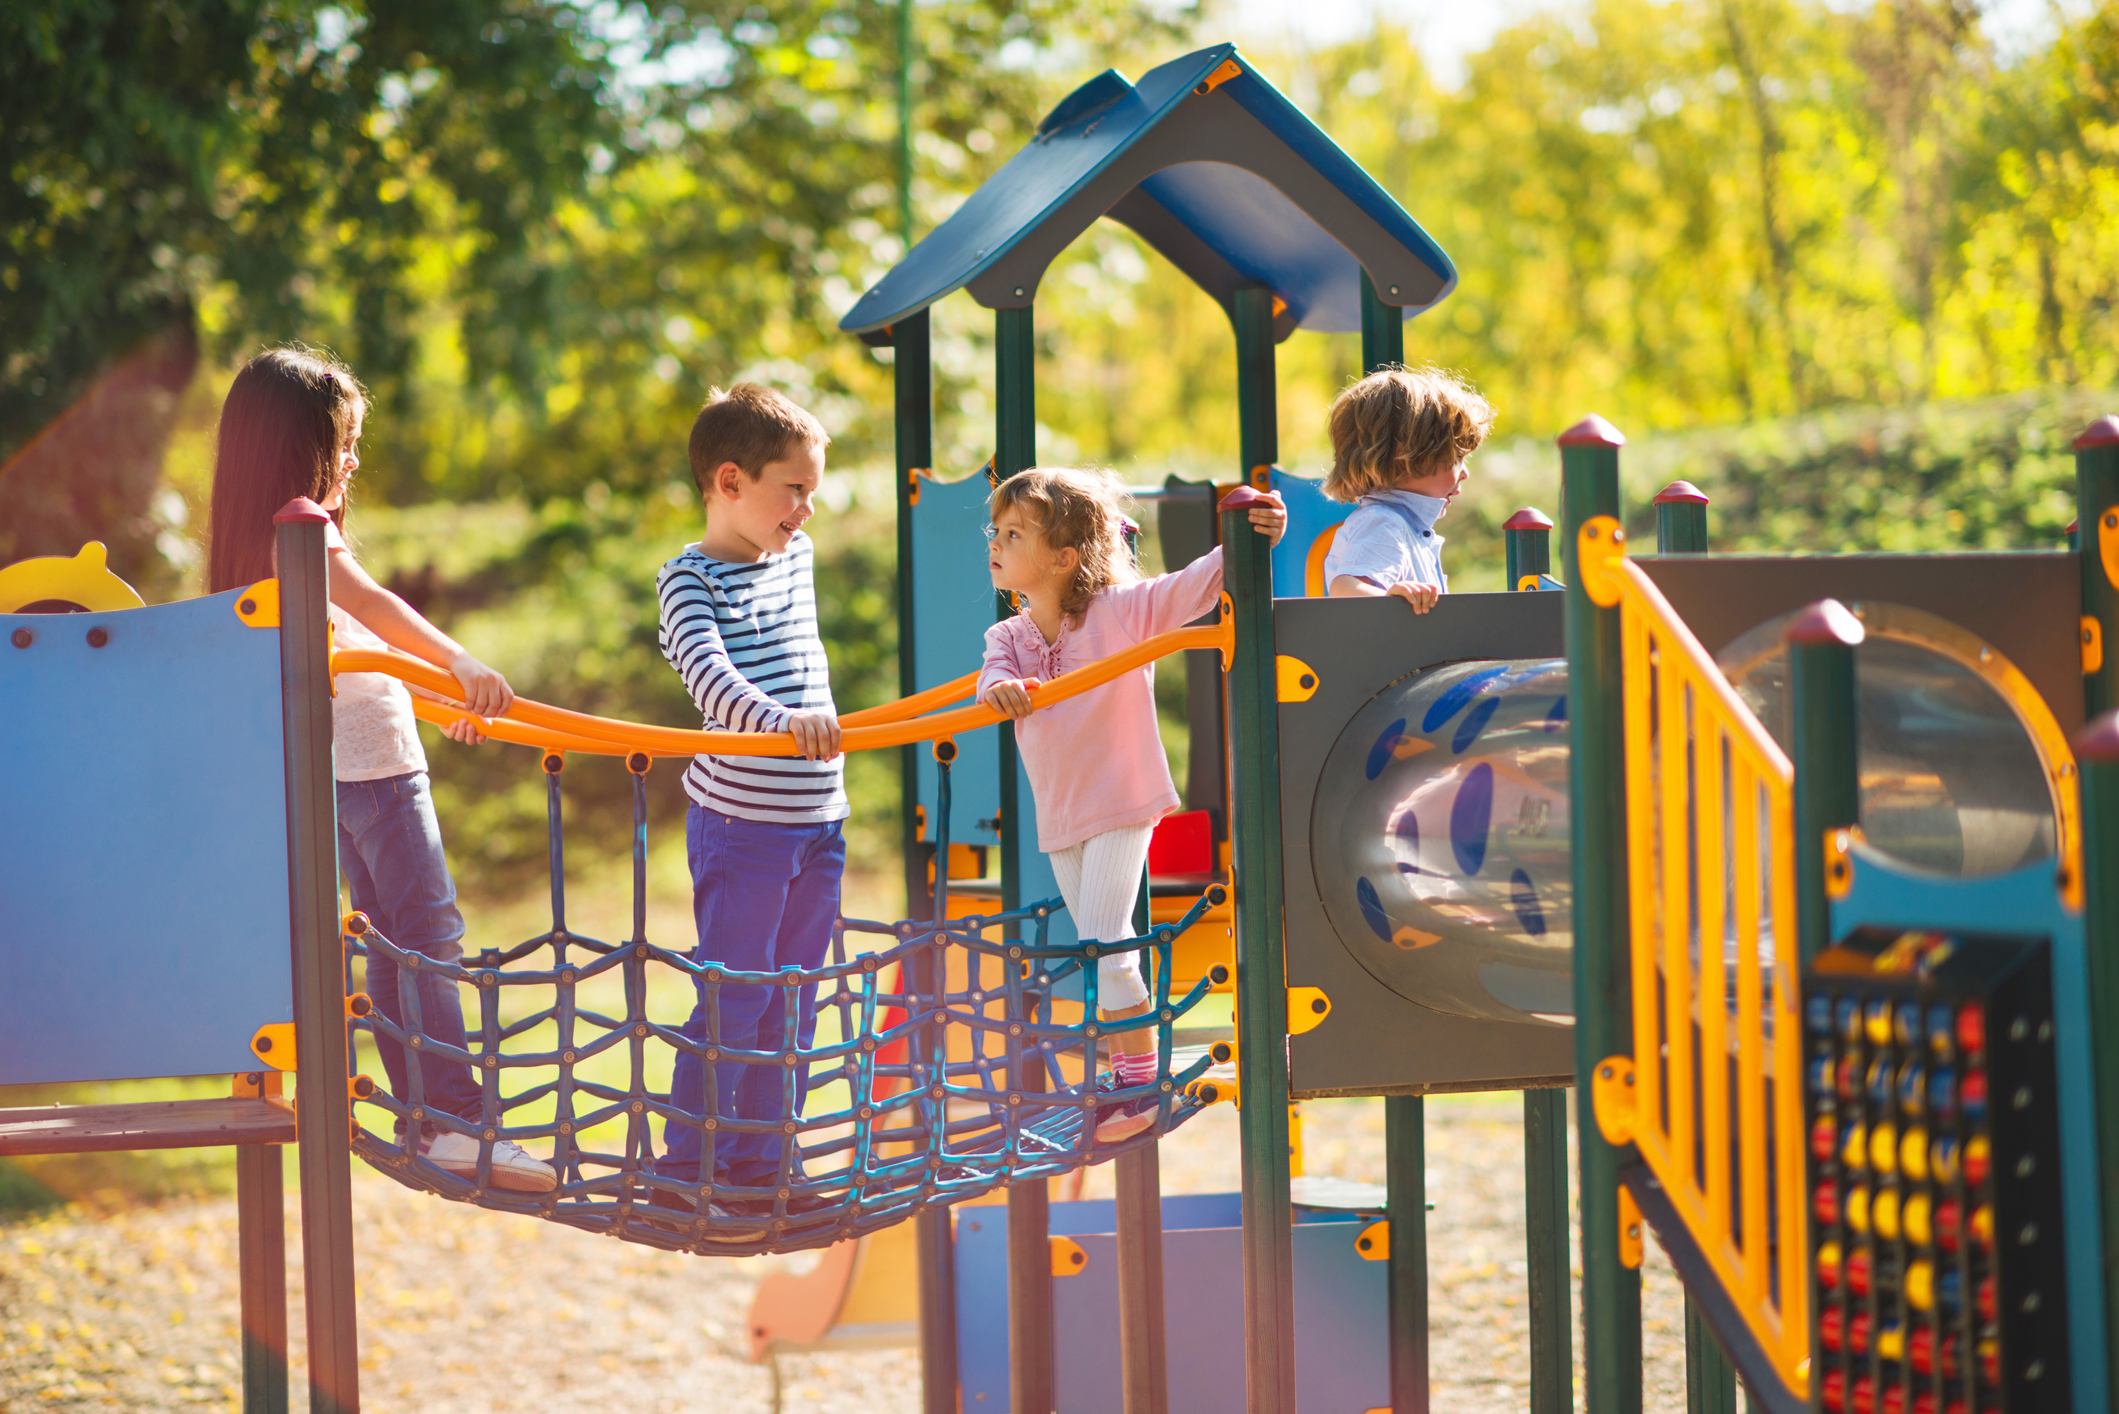 Children playing together on a playground